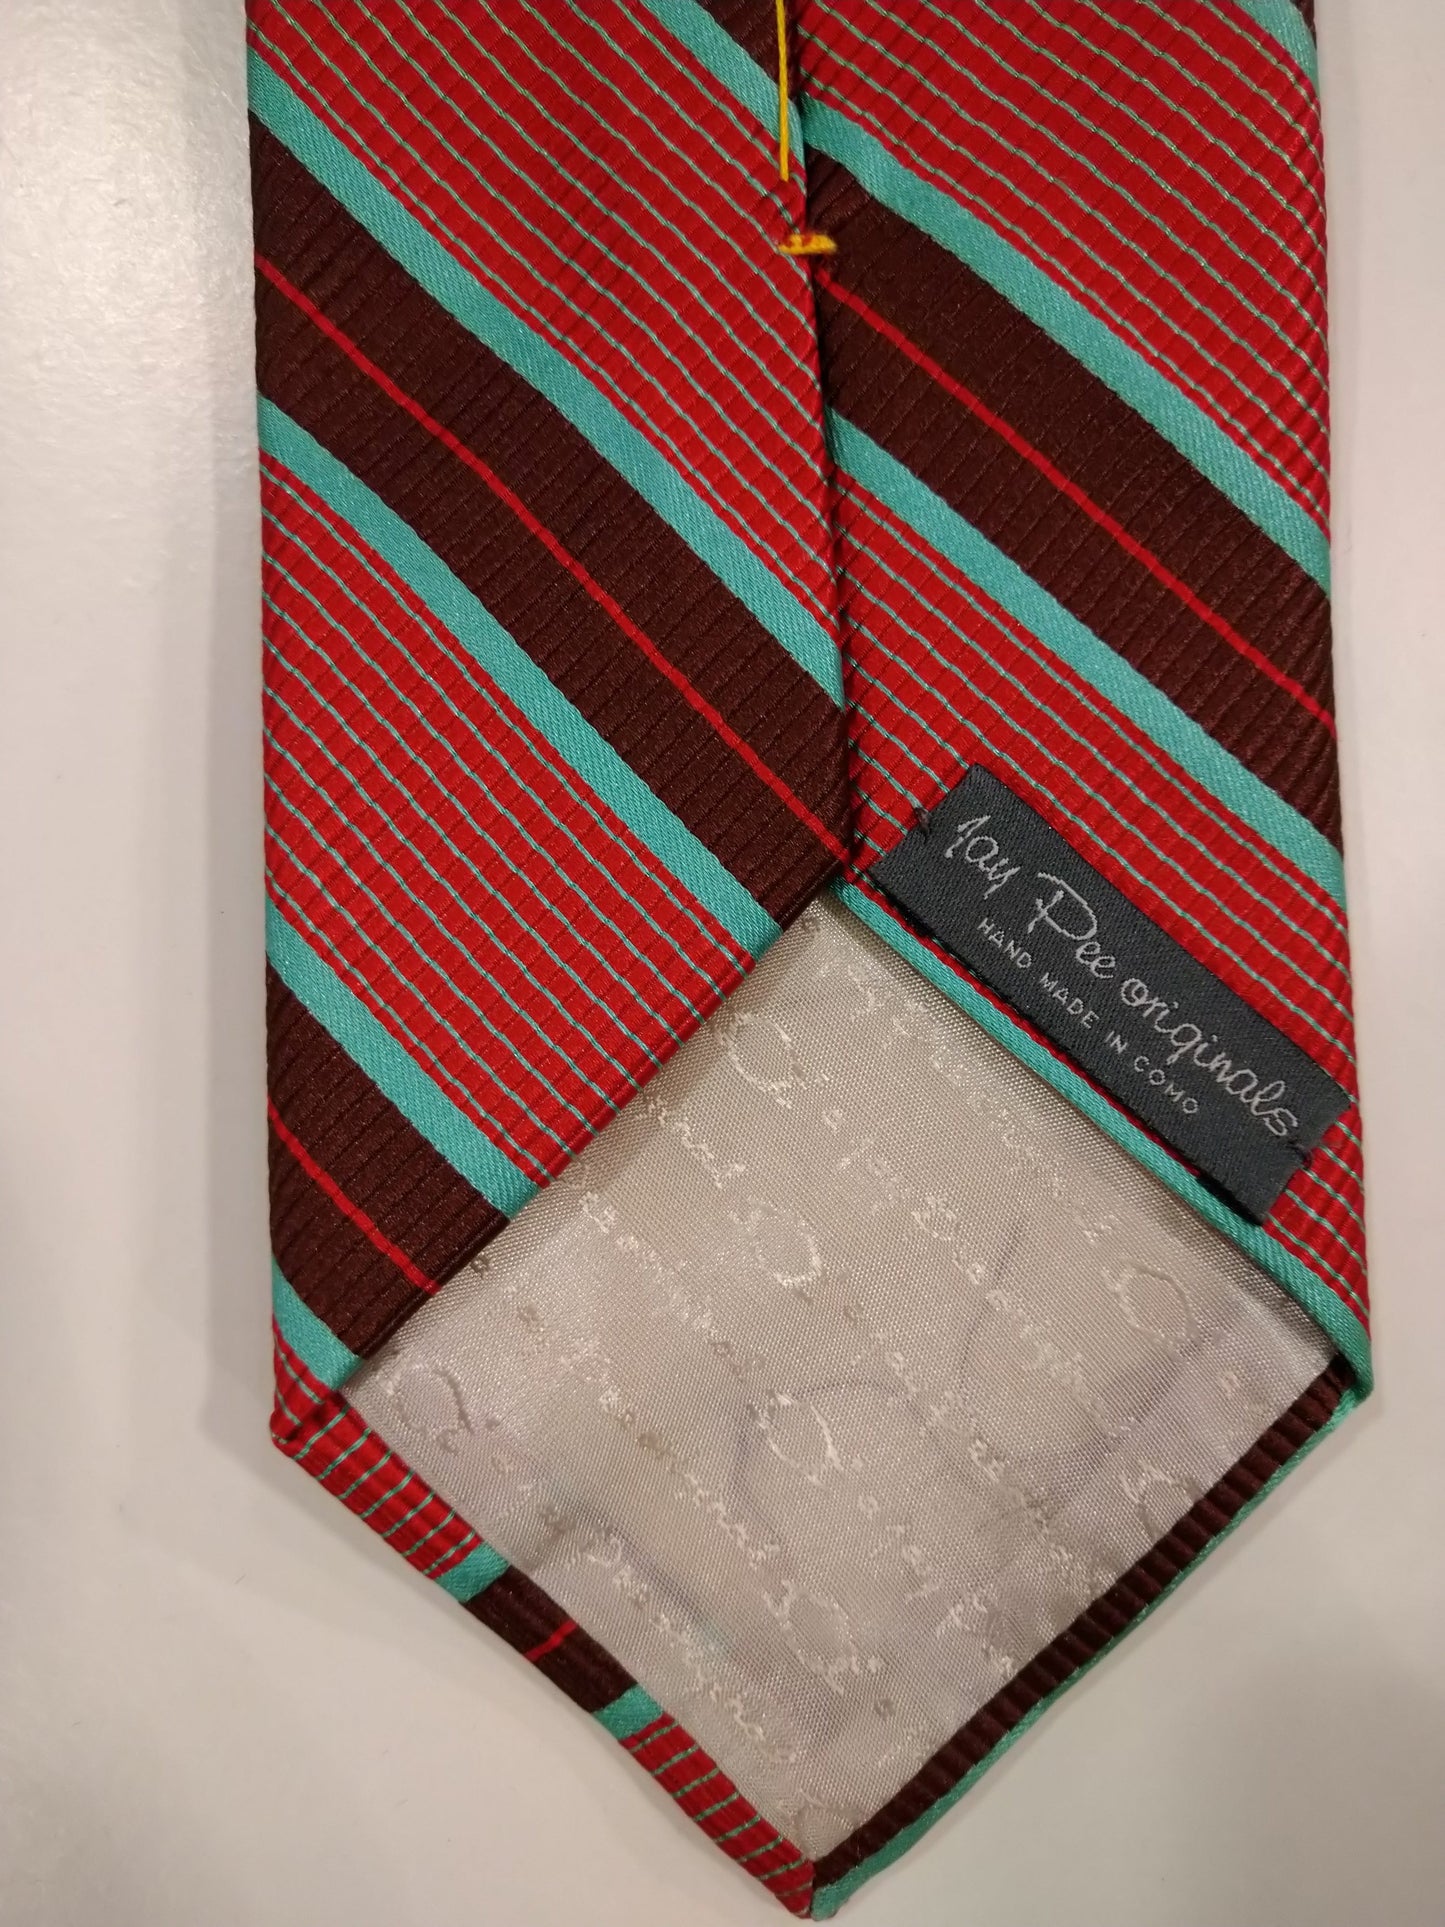 Jay Pee Original Mabed in Como Silk Tie. Turquoise brun rouge rayé.